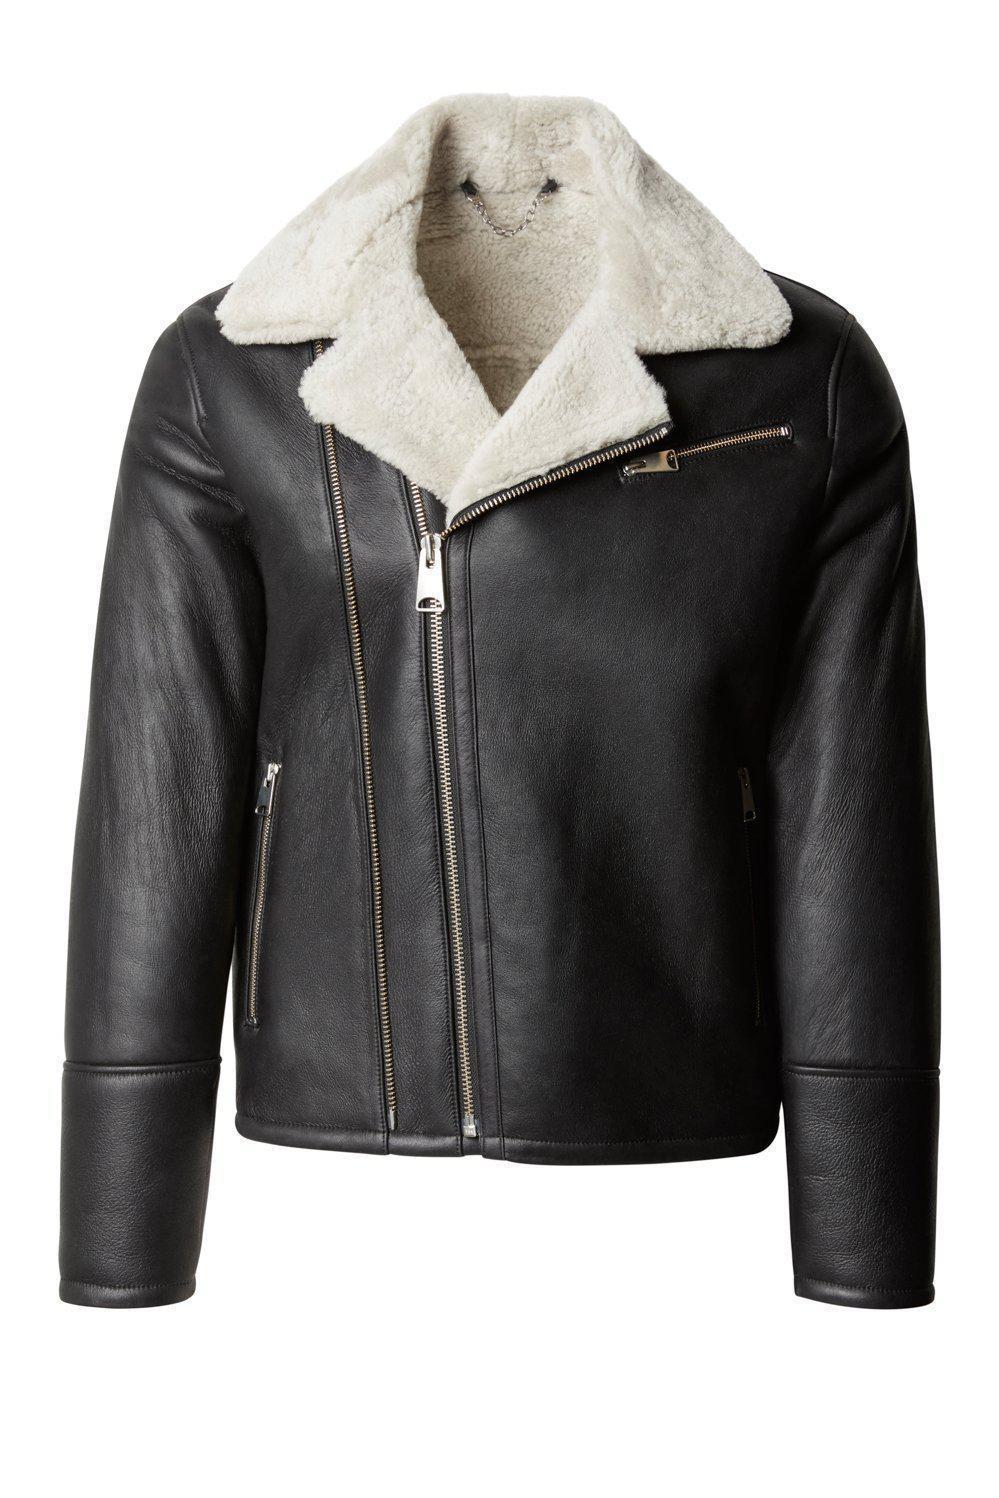 Shearling Lined Leather Jacket - Black - Ron Tomson